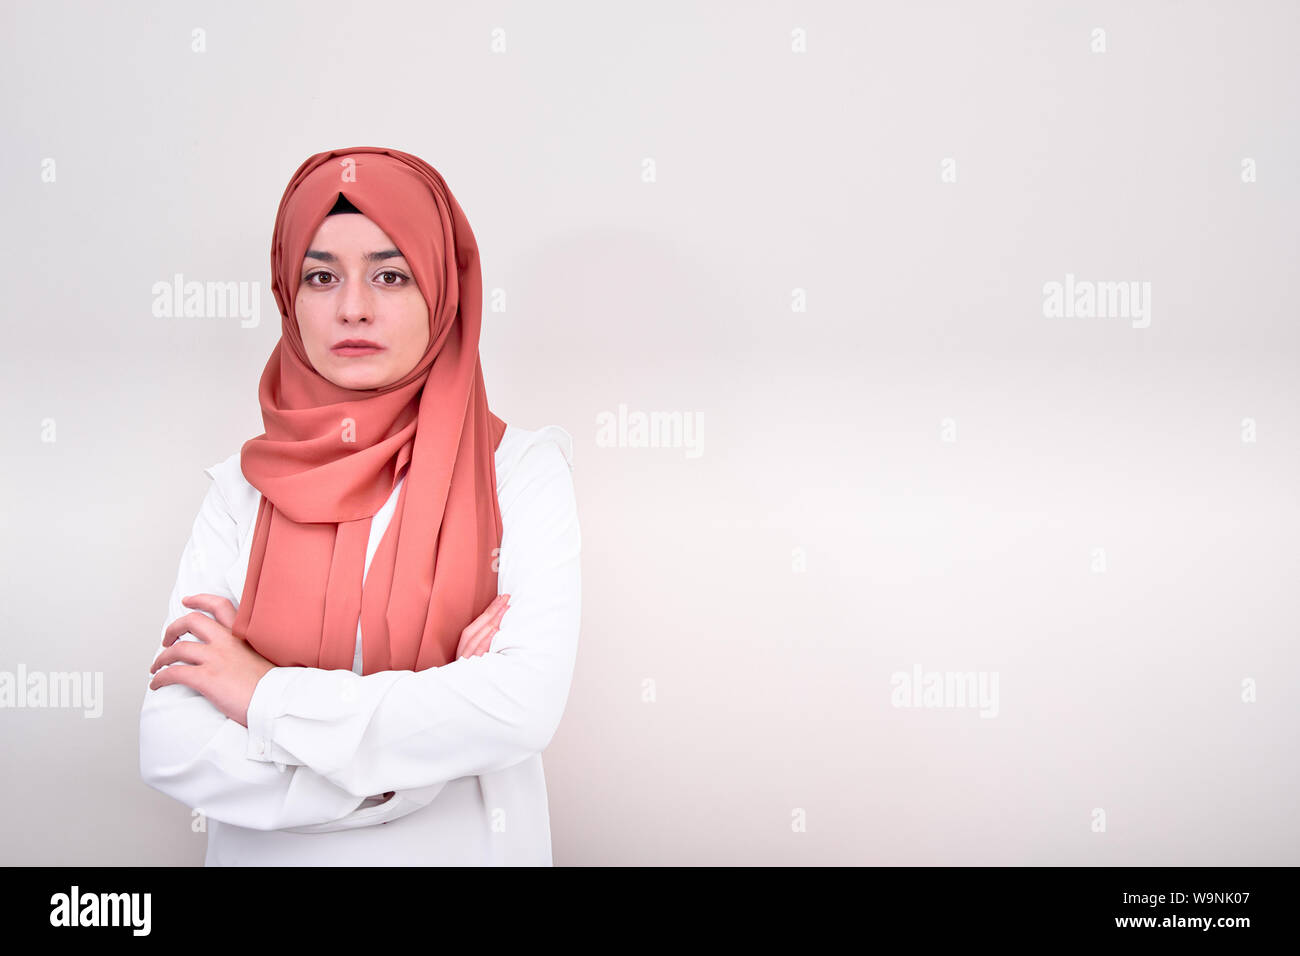 Muslim girl folded arms with isolated white background, hijab muslim teacher or doctor woman folded arms Stock Photo